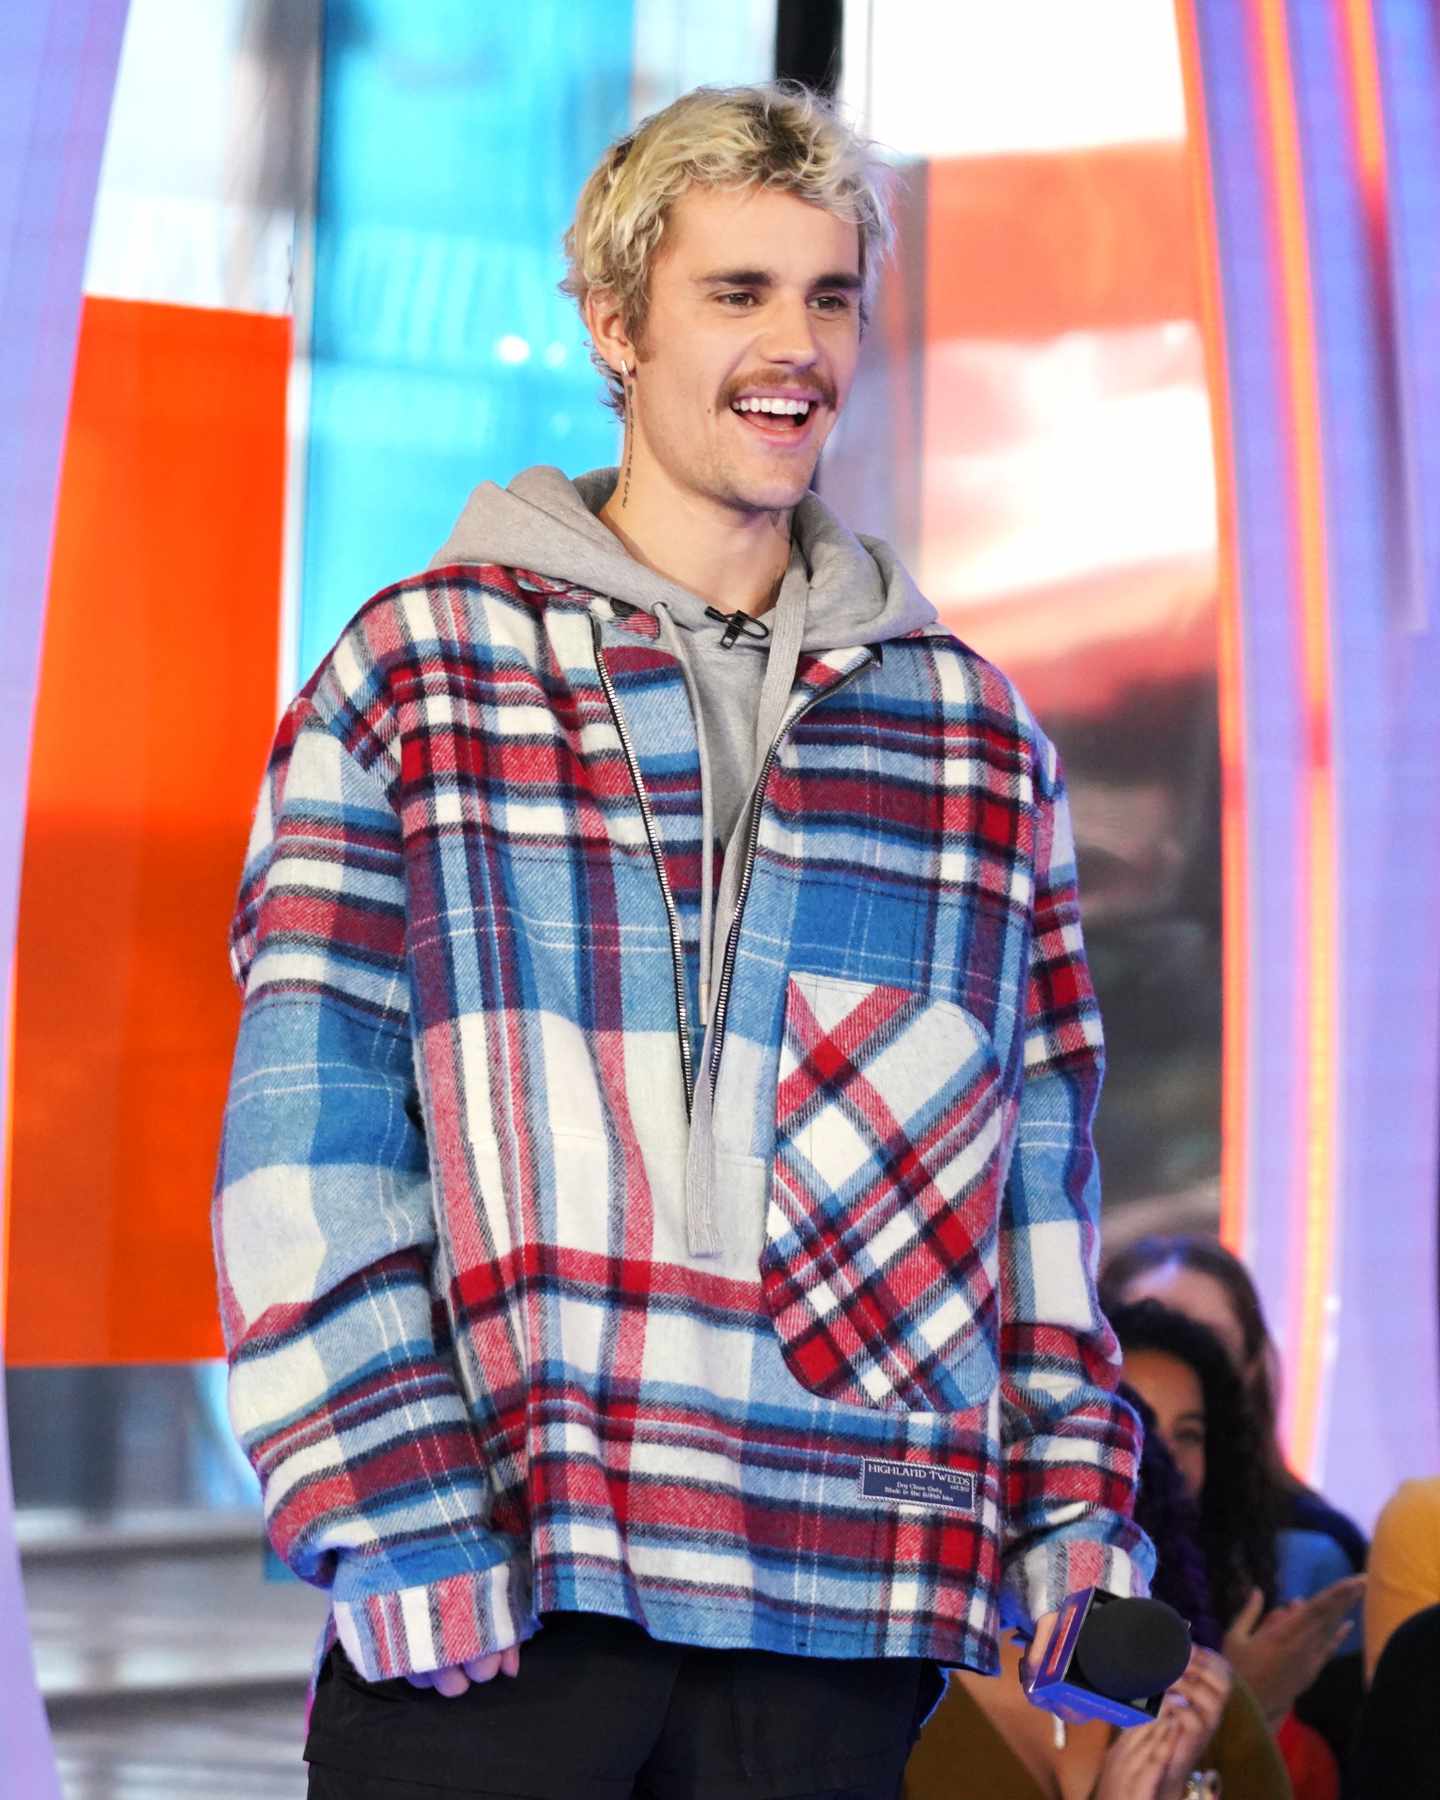 Justin Bieber: All You Need to Know About the Pop Superstar